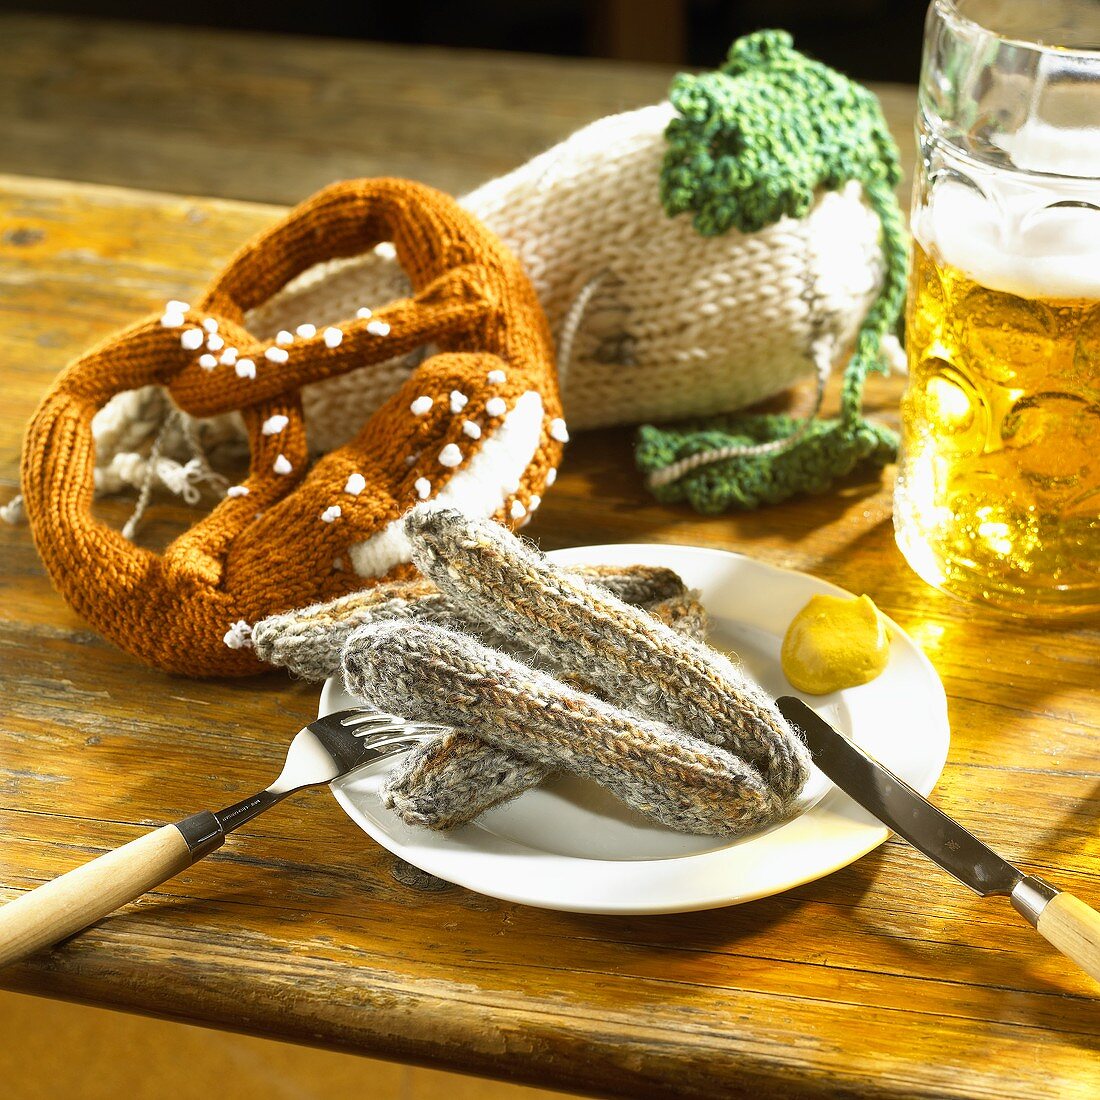 Knitted sausages, pretzel and radish with a litre of beer